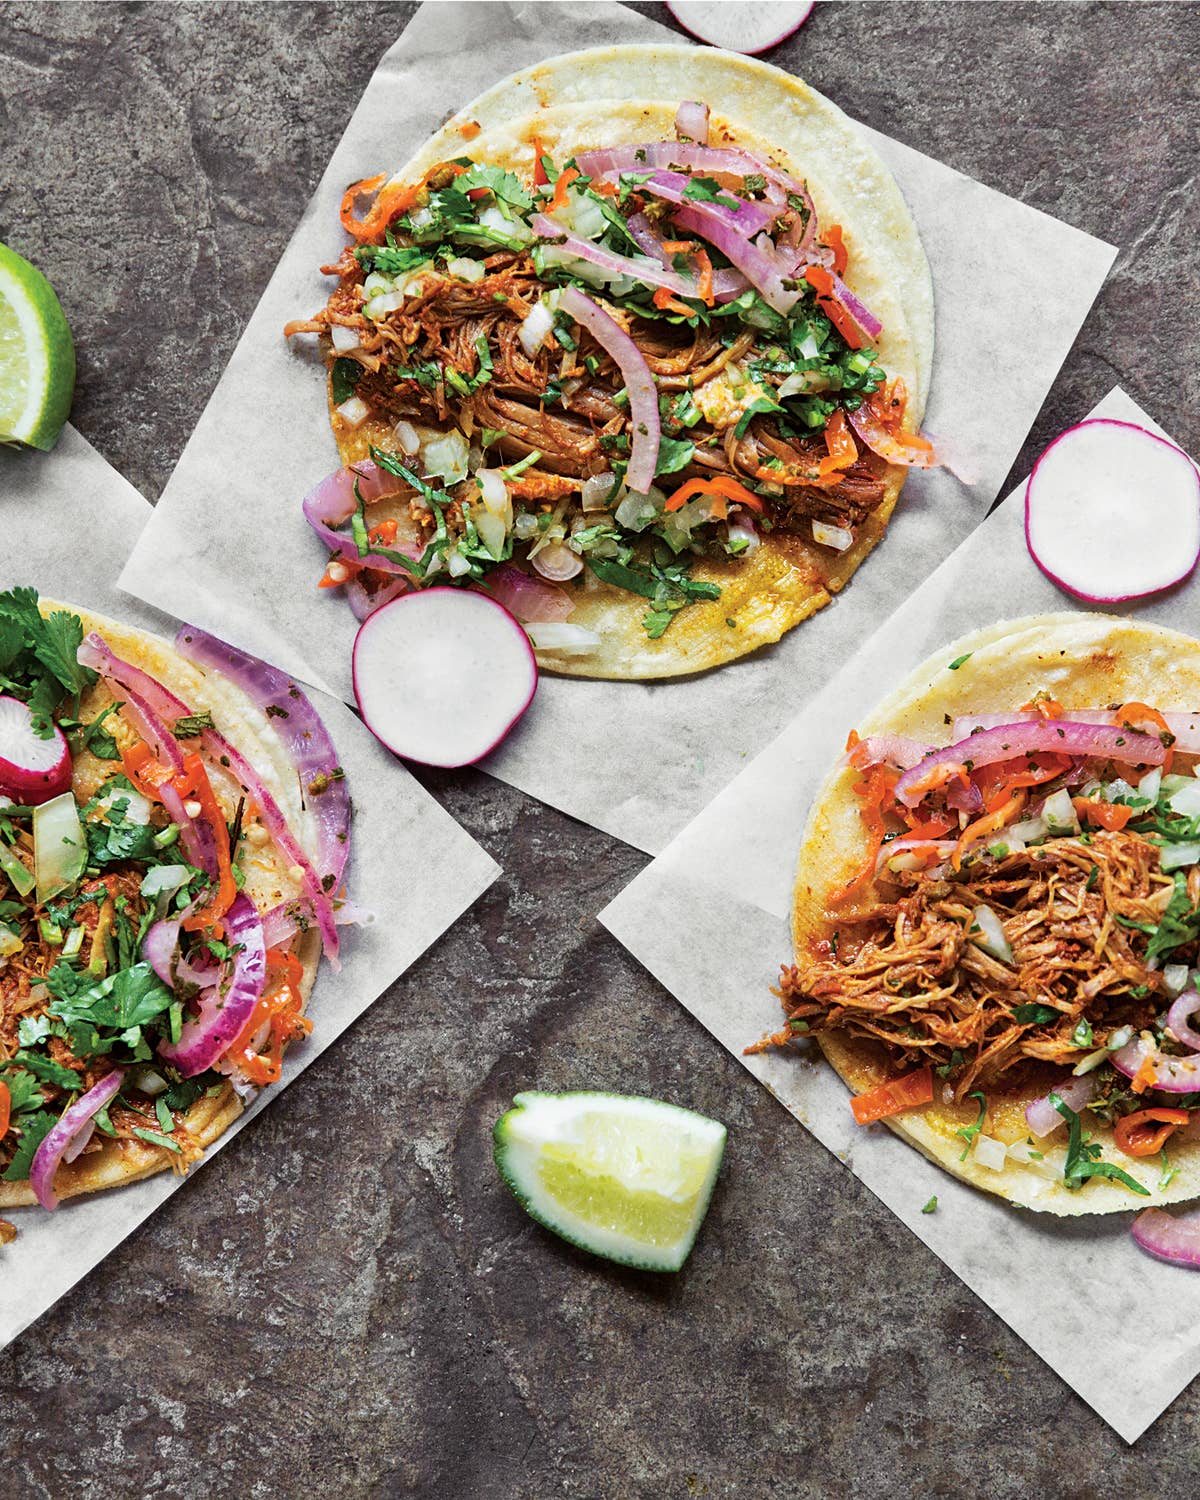 Our 29 Best Californian Recipes, From Roadside Tacos to Sprouted Grain Salads